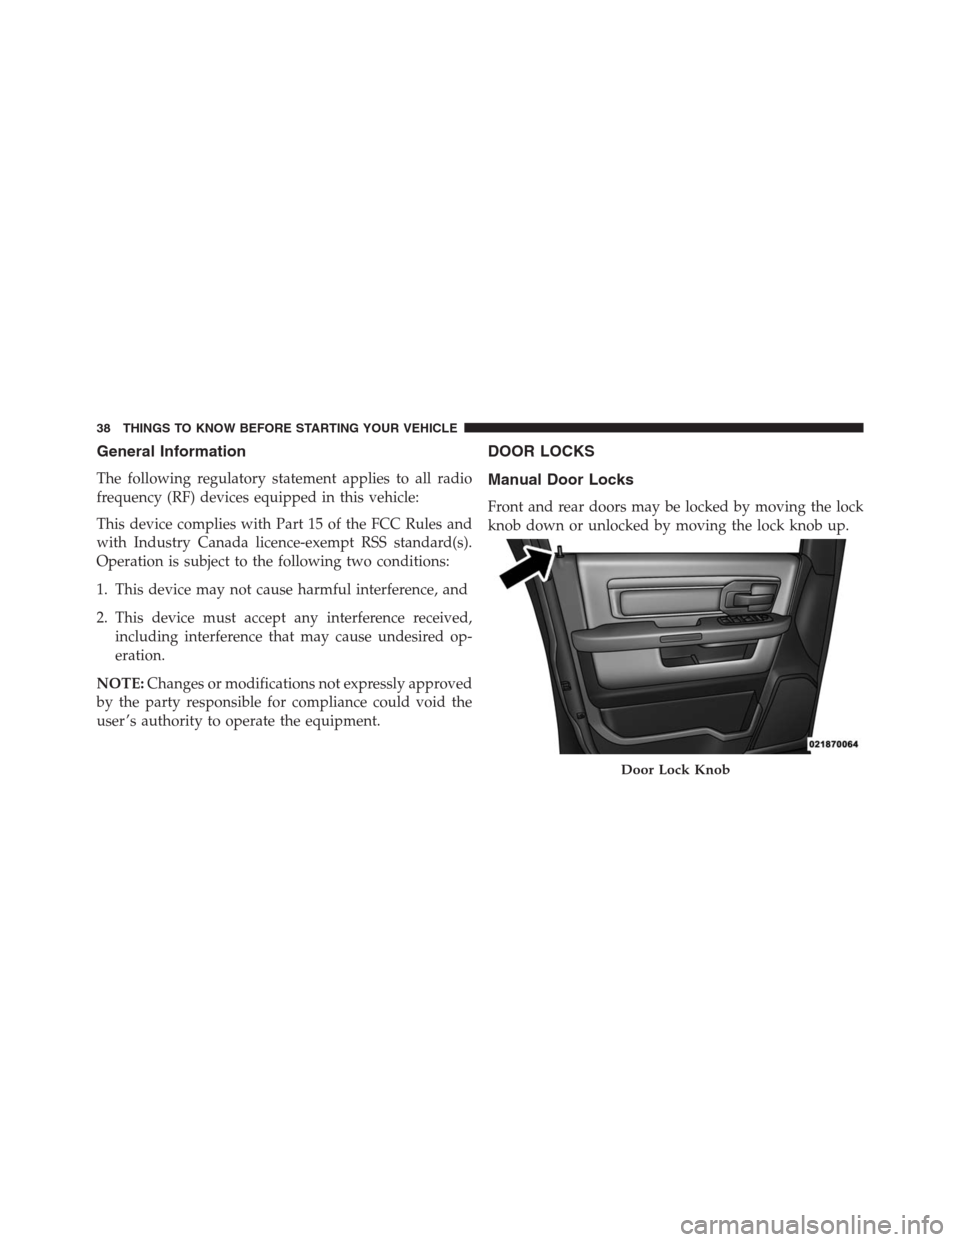 Ram 1500 2016 Owners Guide General Information
The following regulatory statement applies to all radio
frequency (RF) devices equipped in this vehicle:
This device complies with Part 15 of the FCC Rules and
with Industry Canada